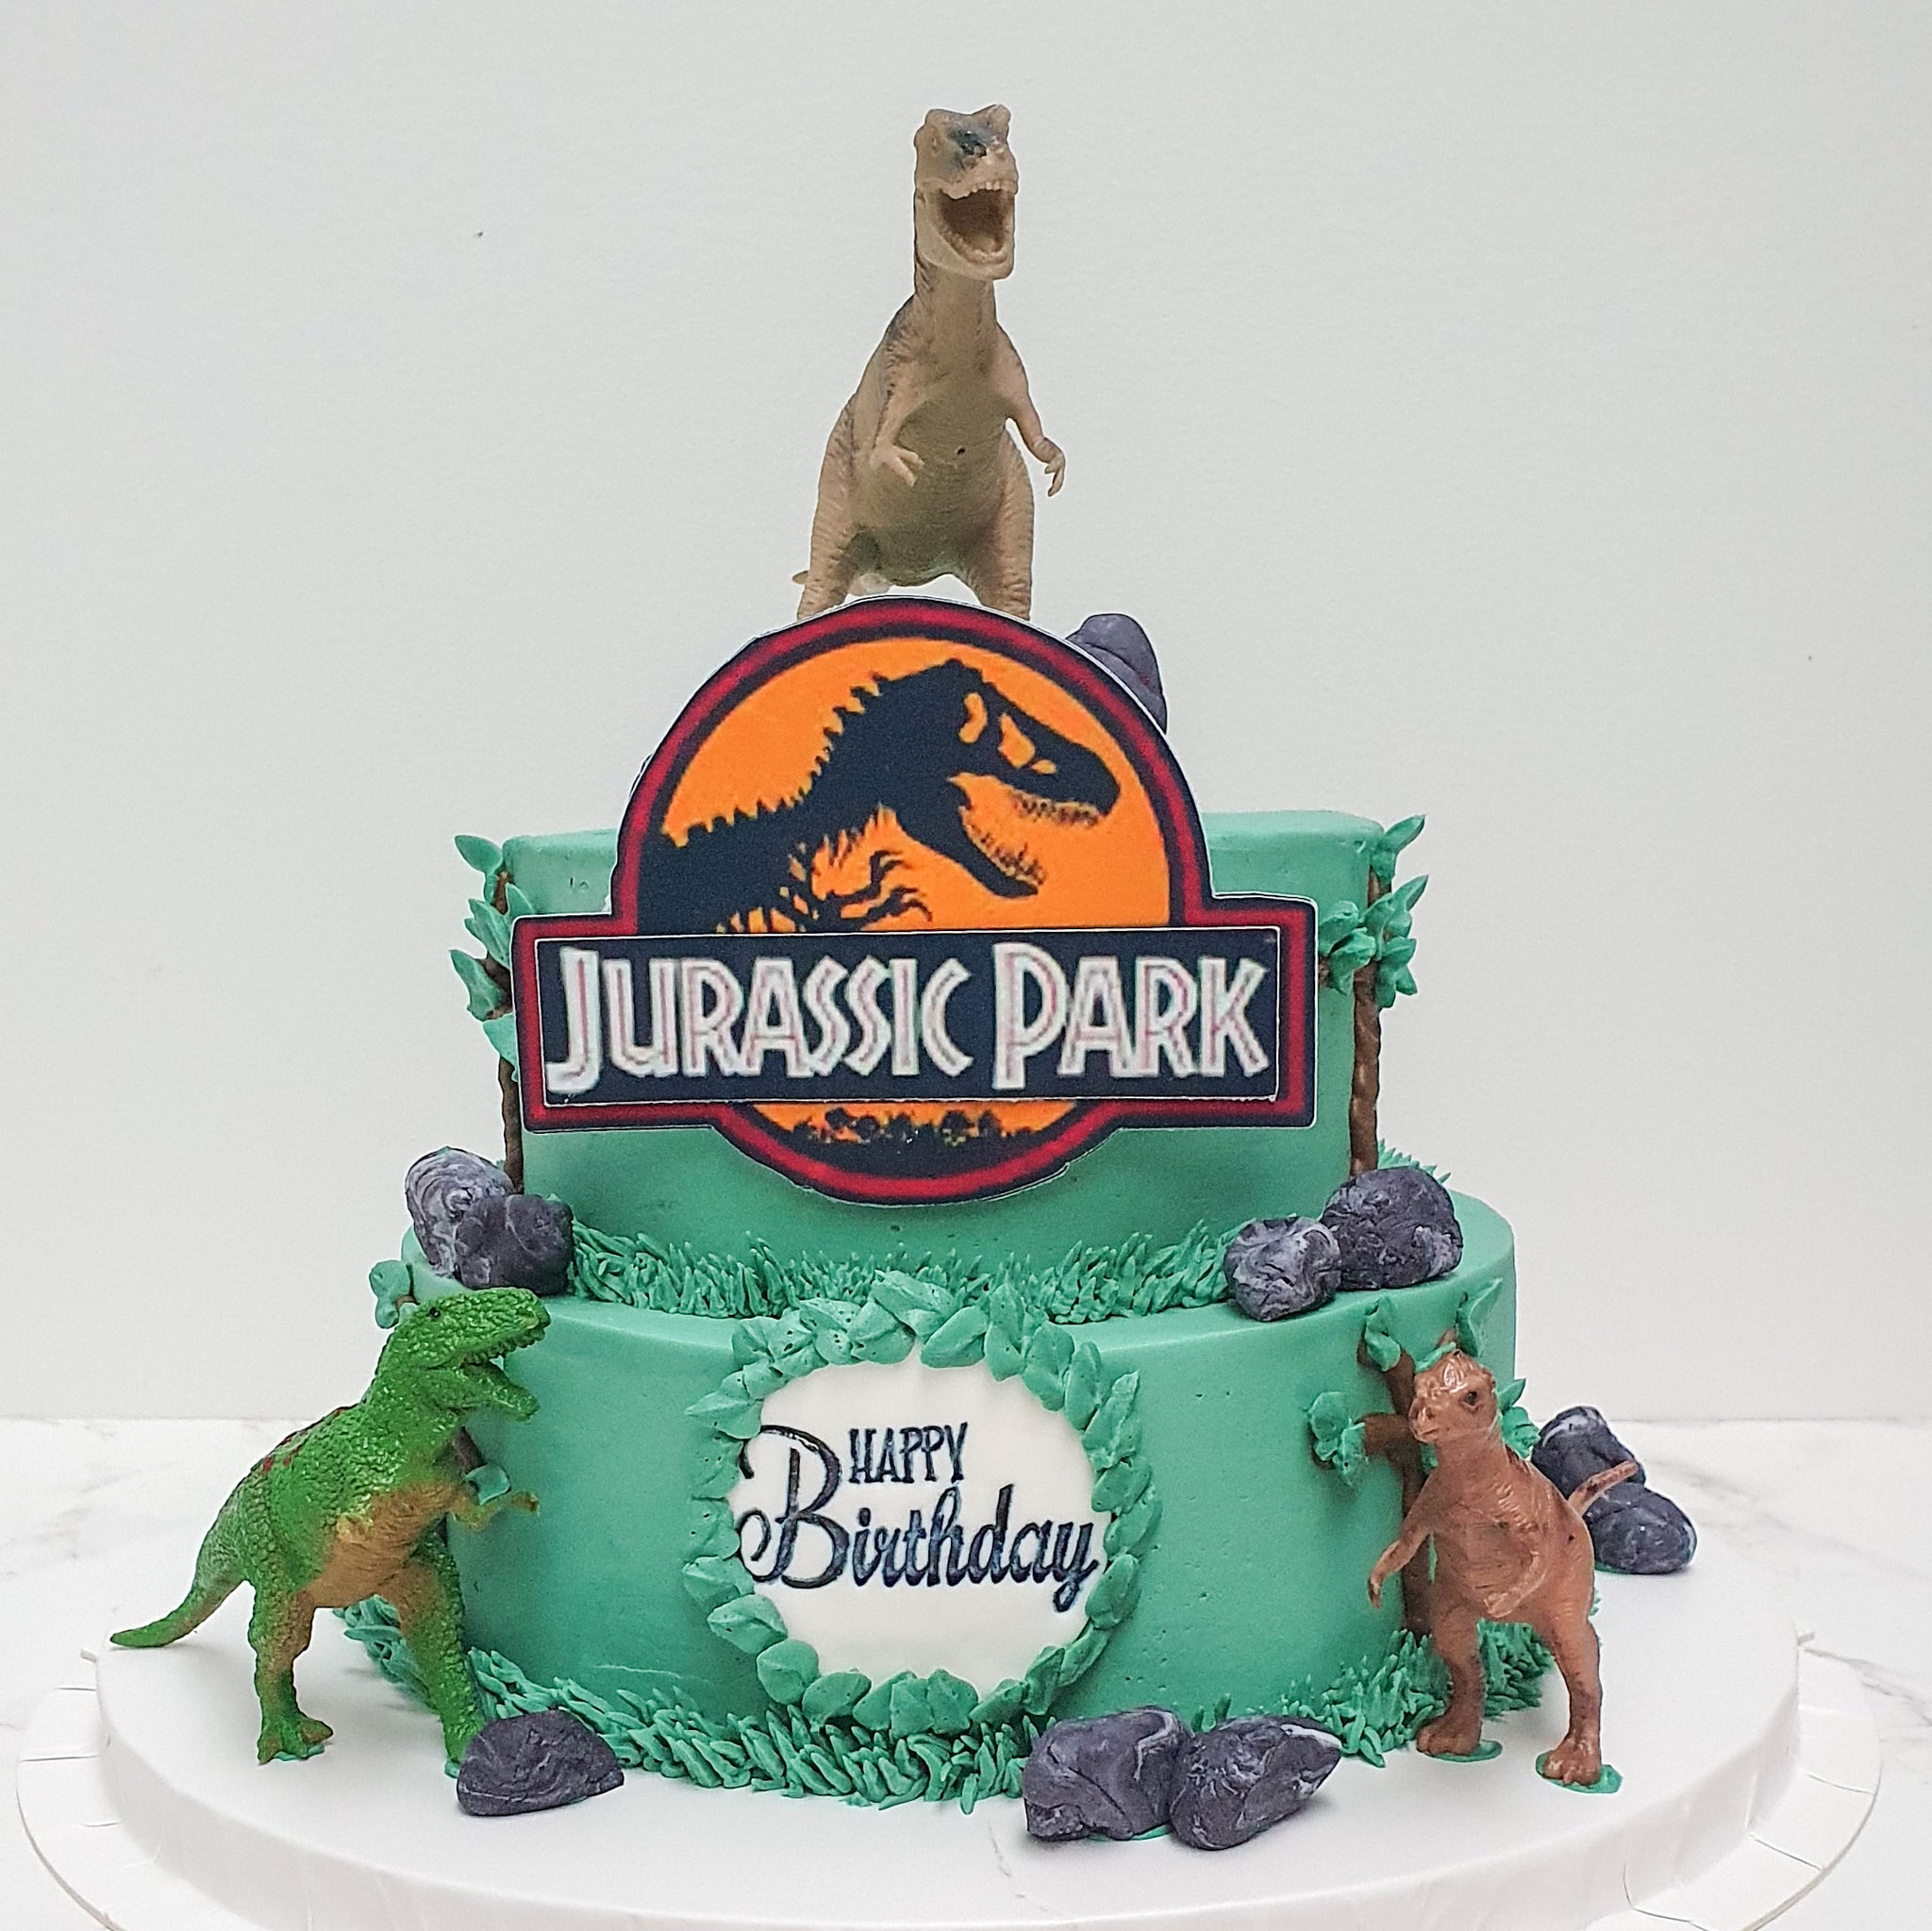 Dinosaur themed cake for kids birthday party, To order your customized theme  cakes, cupcakes and desserts, contact on Whatsapp or DM… | Instagram